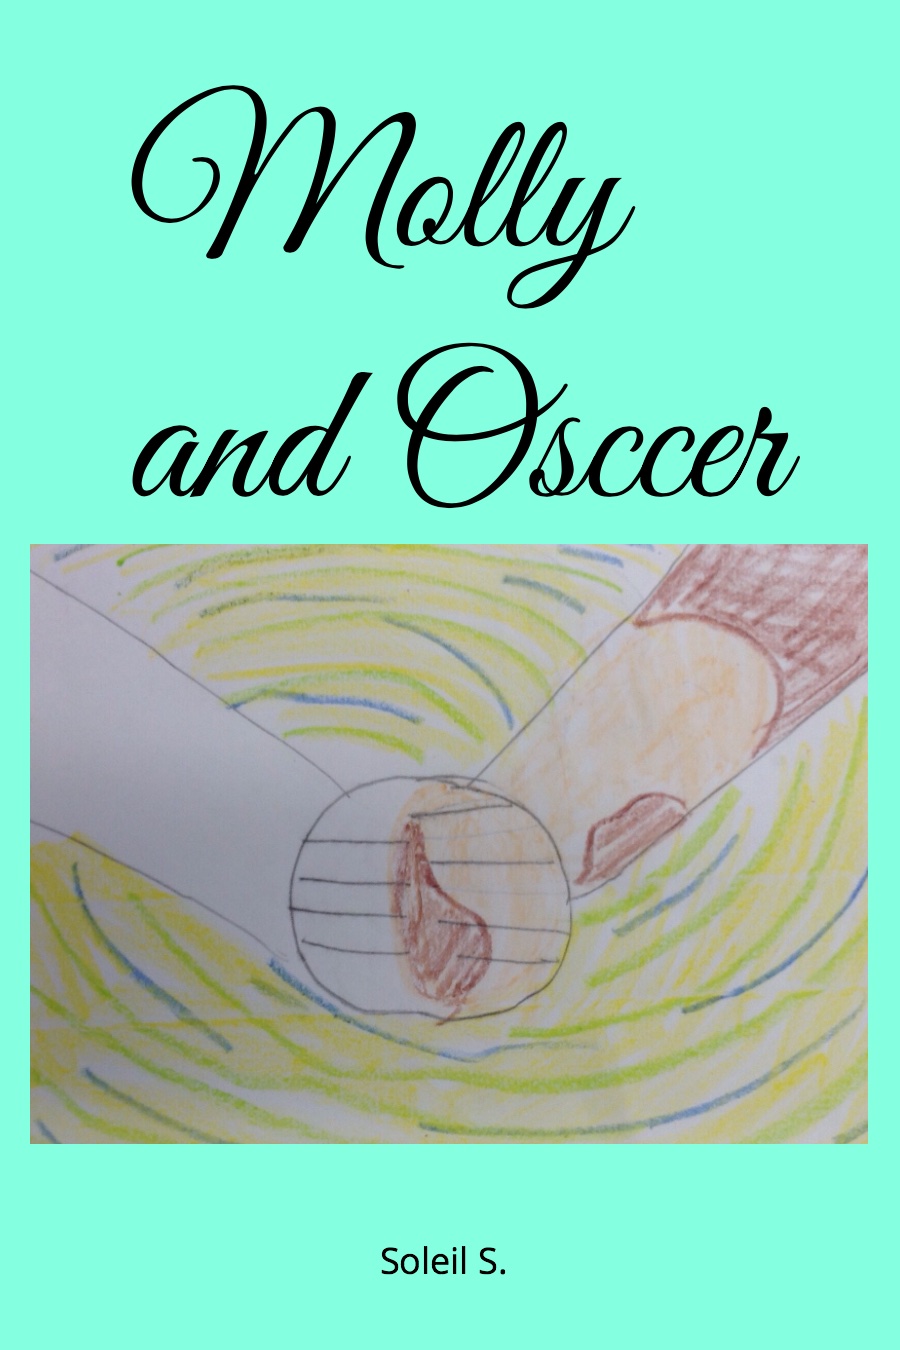 Molly and Osccer by Soleil S